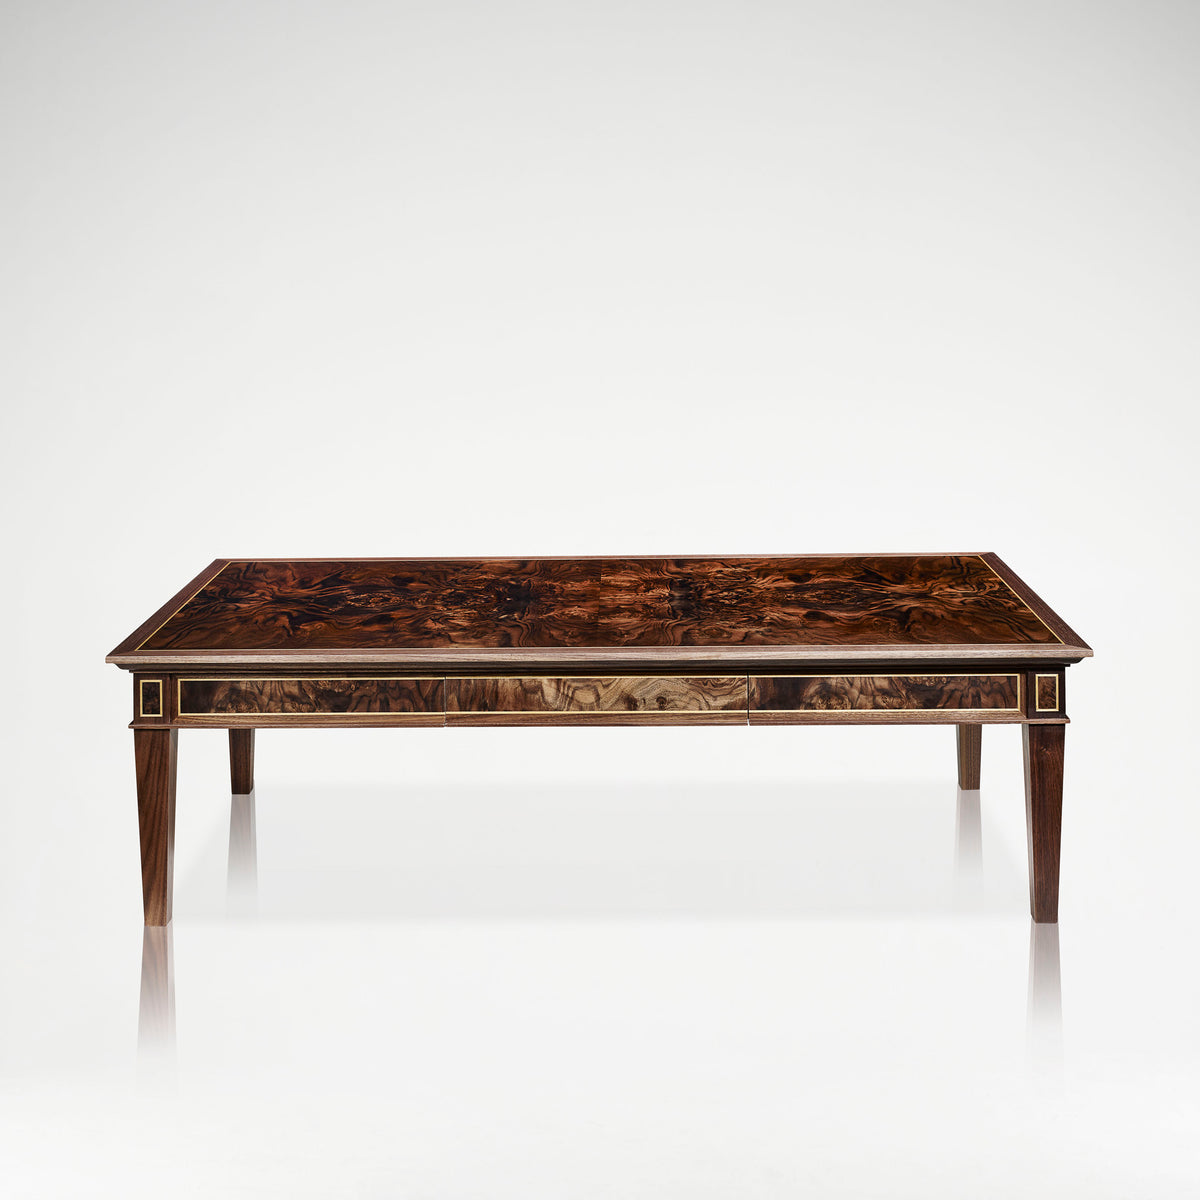 LINLEY Classic Coffee Table - Burr Walnut and Satinwood | Bespoke Design & Luxury Furniture | LINLEY